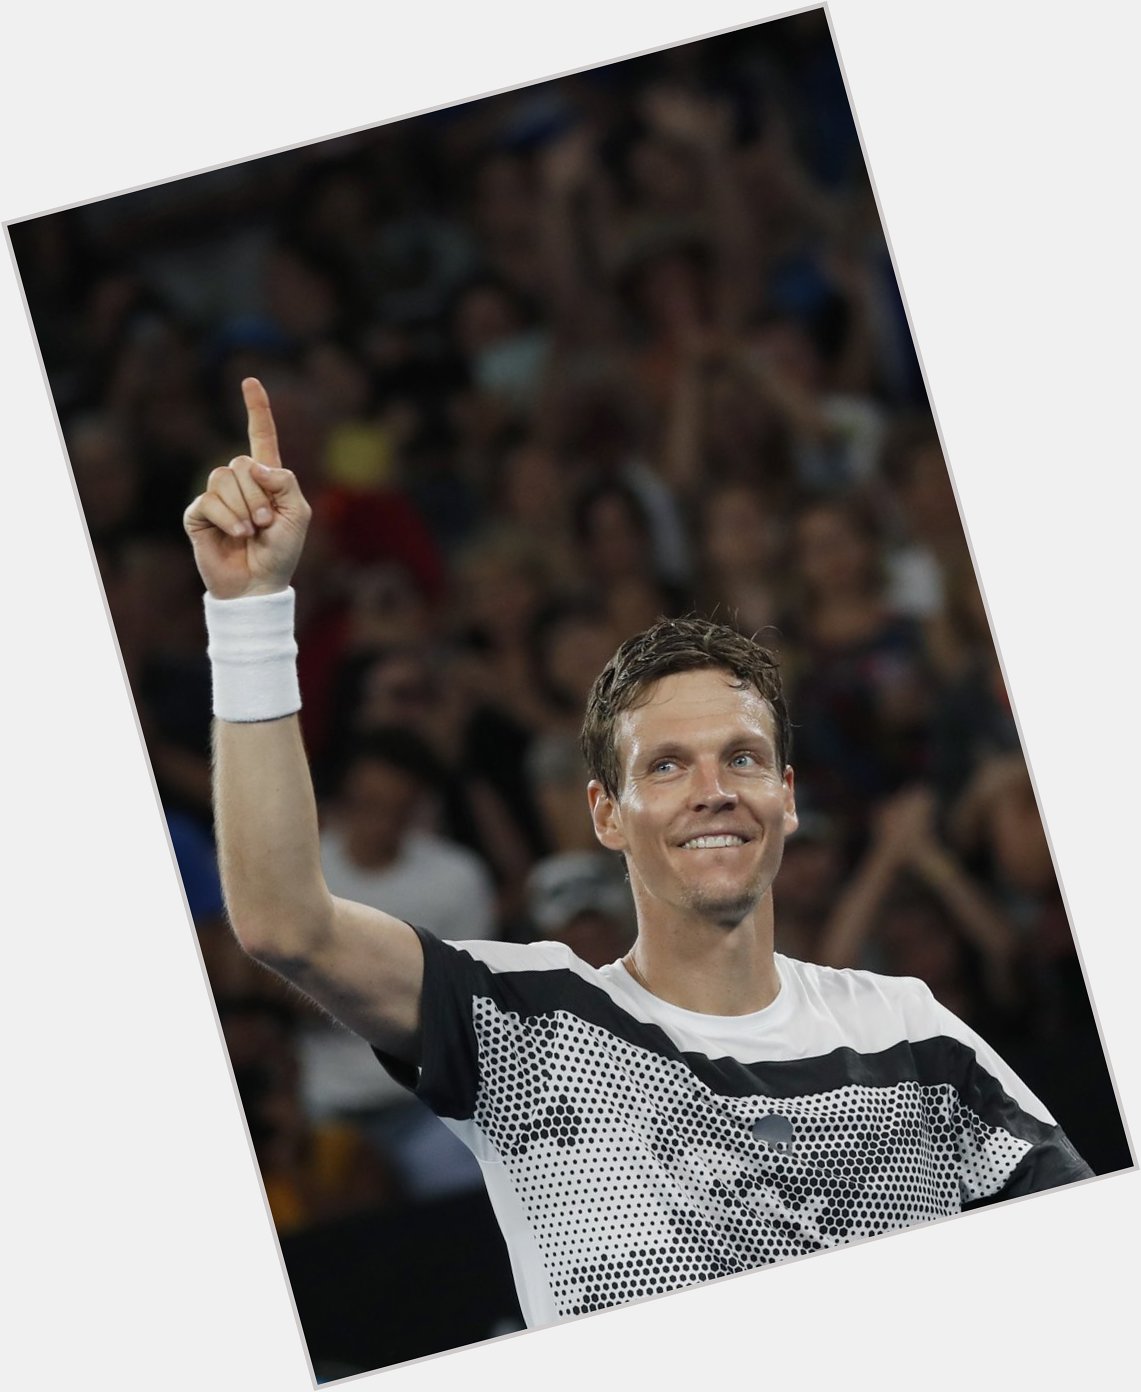 A solid Top 10 member while the BIG 4 was at its best: Happy Birthday Tomas Berdych, 35 years old today! 